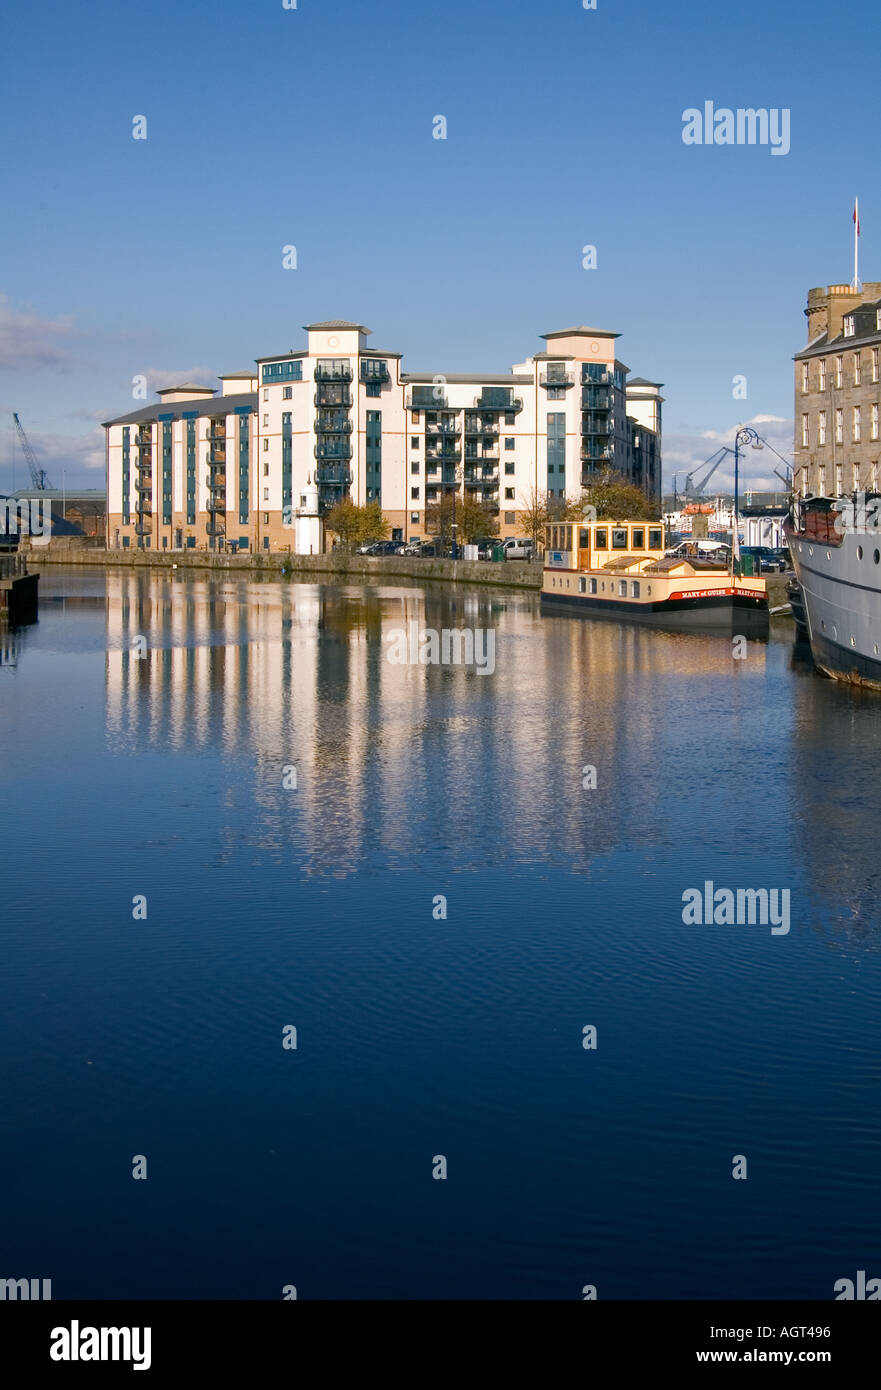 dh  LEITH LOTHIAN New dockland flats barge and old buildings alongside Water of Leith Stock Photo